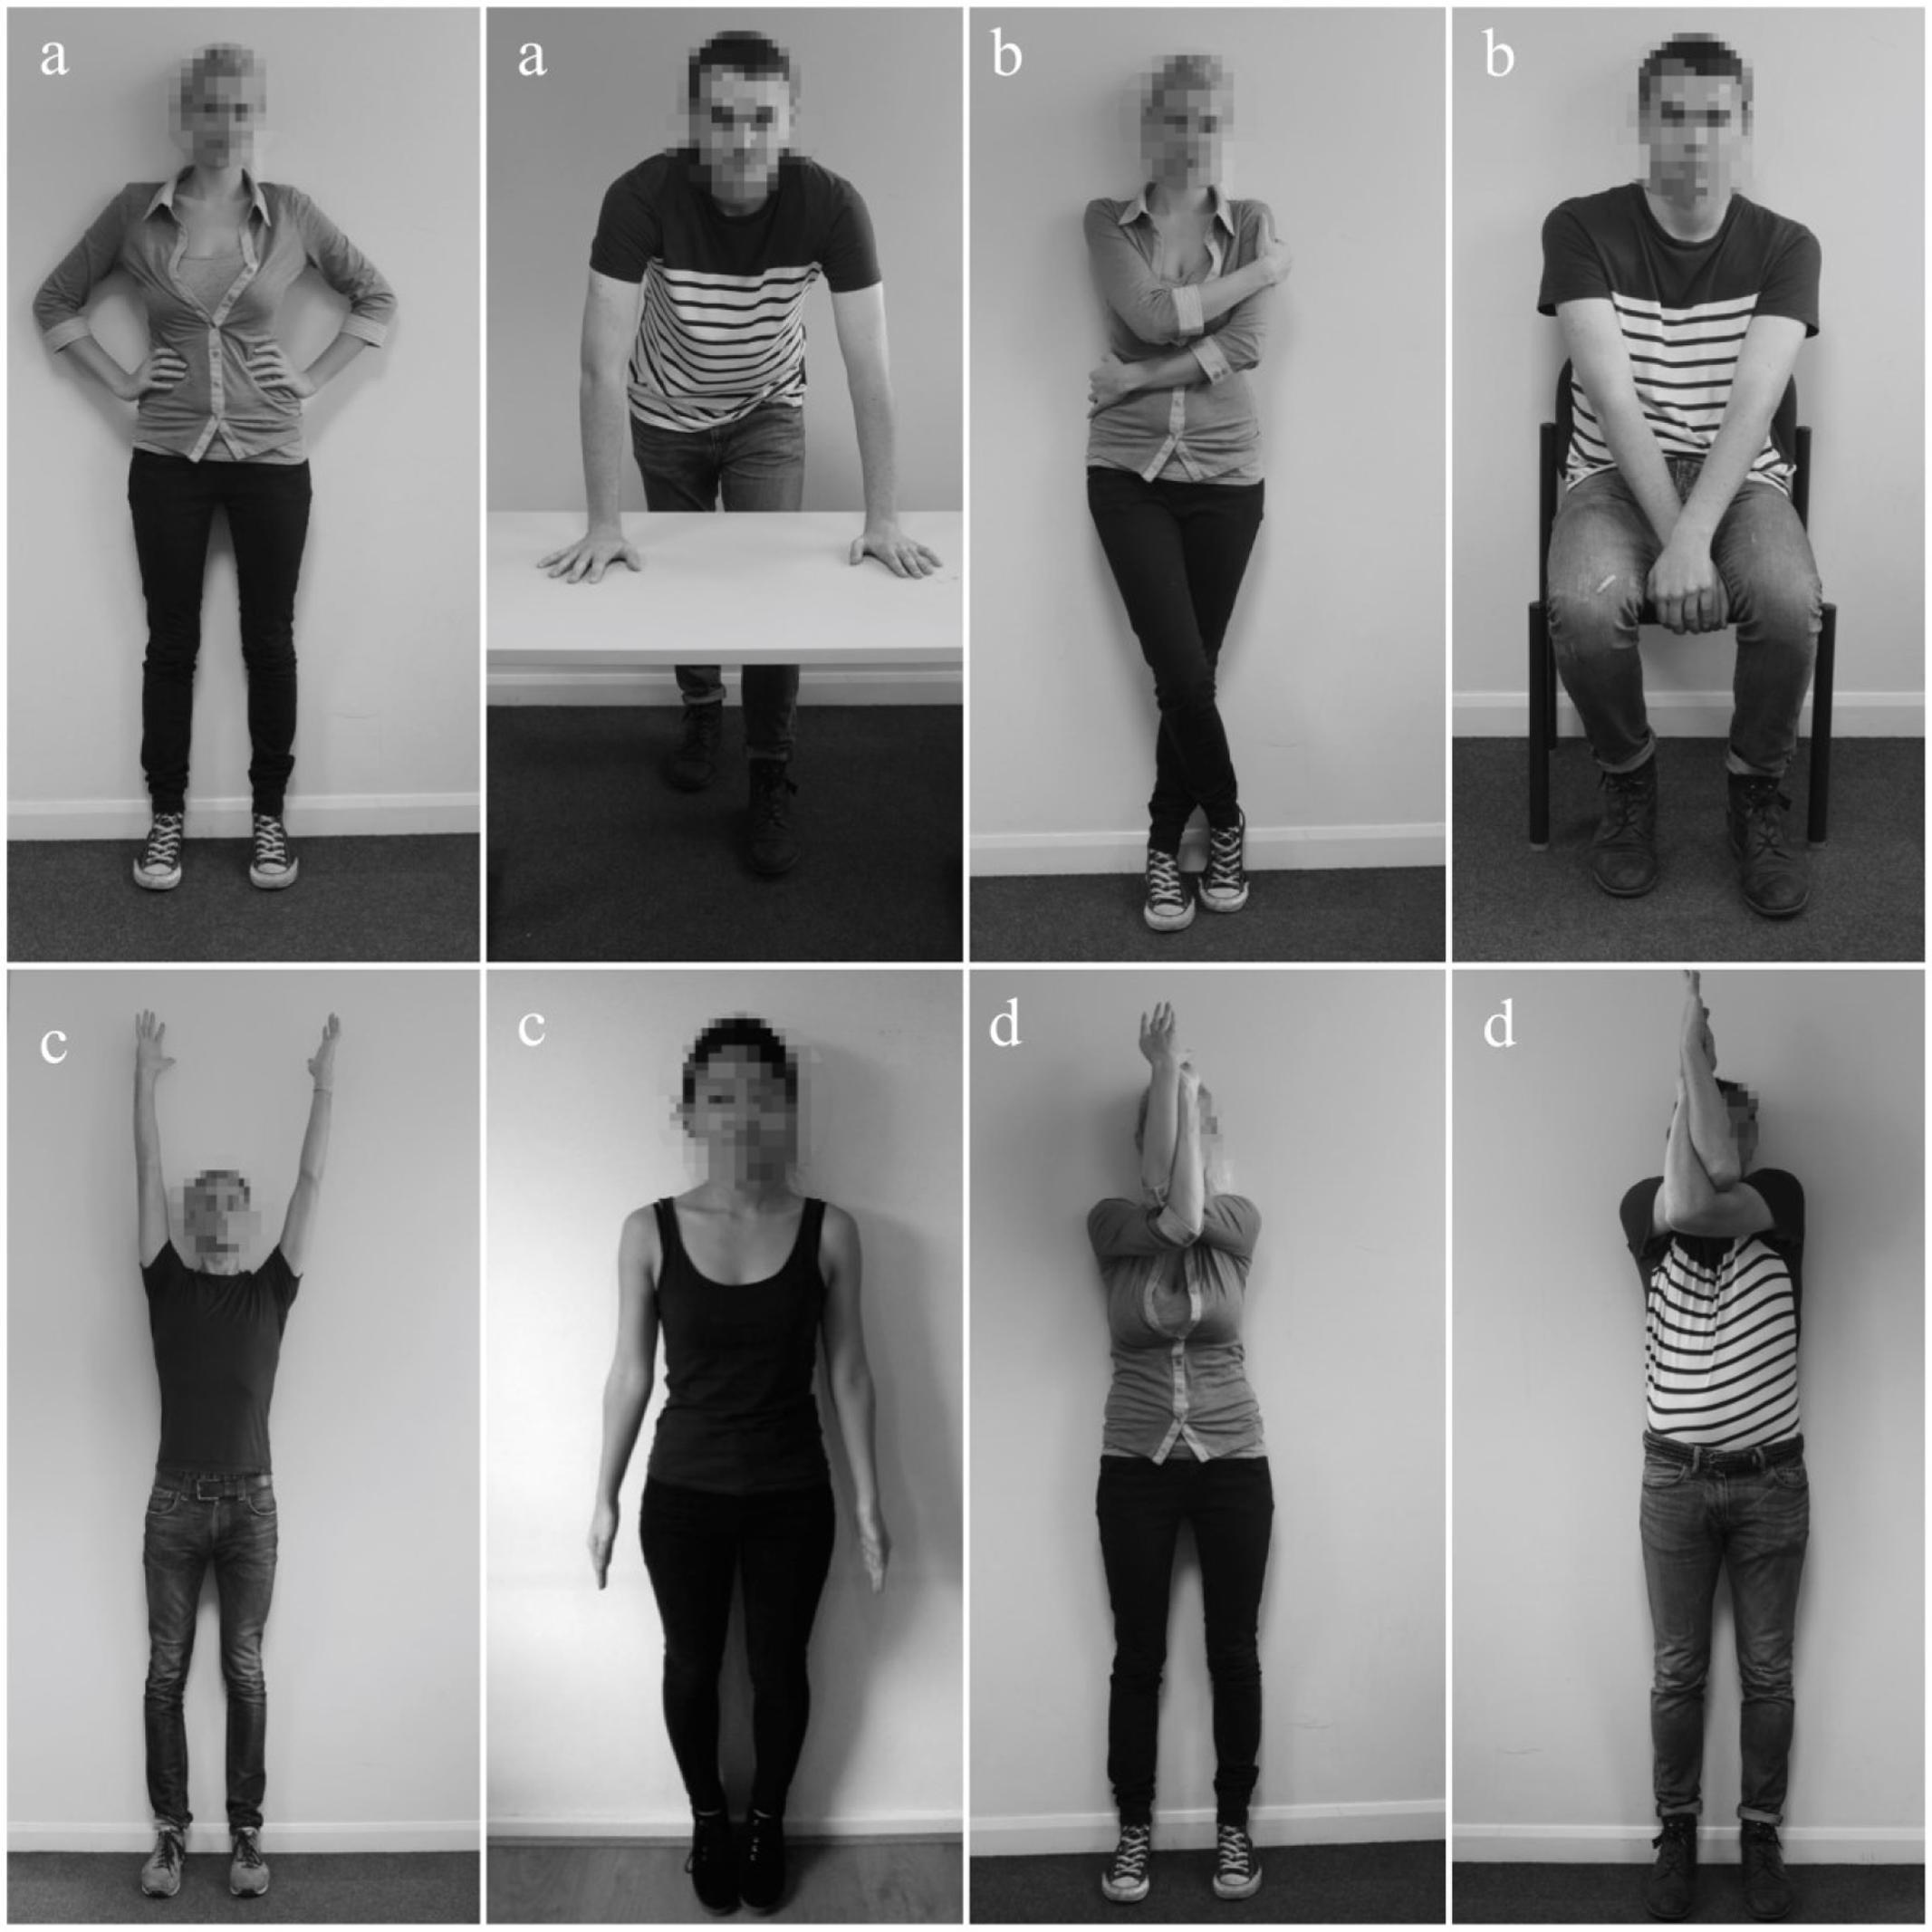 Frontiers  Yoga Poses Increase Subjective Energy and State Self-Esteem in  Comparison to 'Power Poses